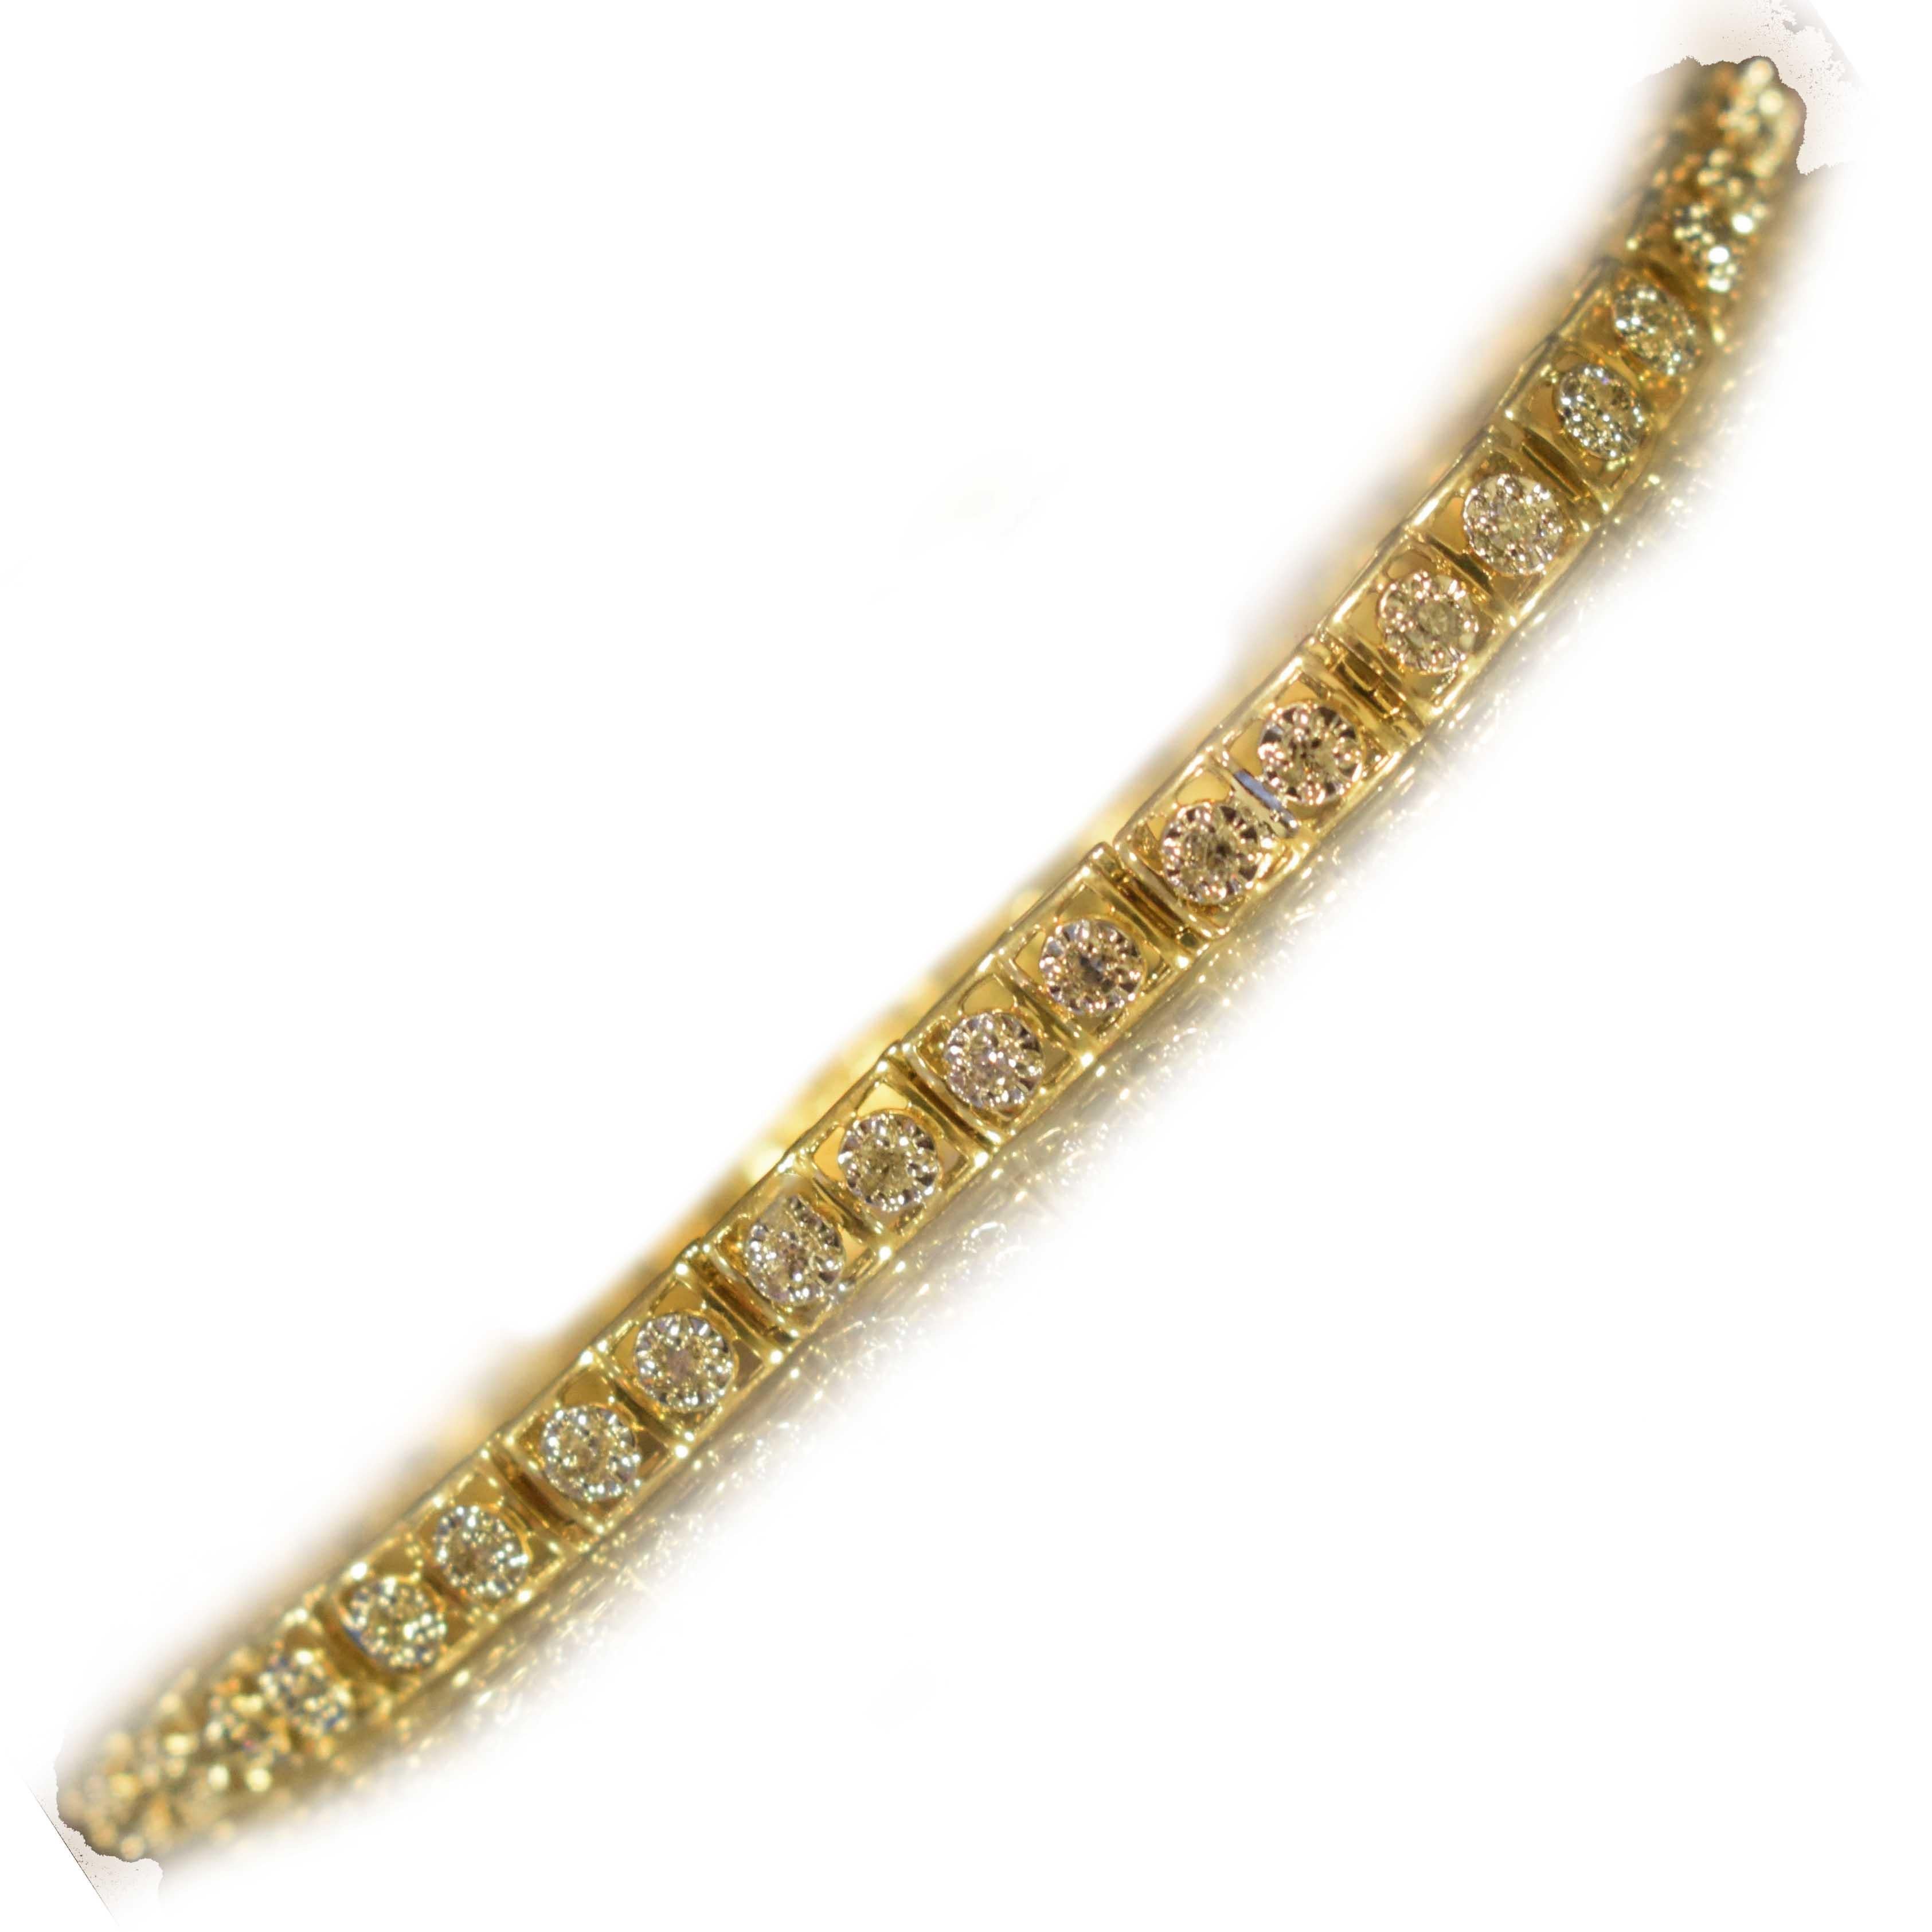 Brilliance Jewels, Miami
Questions? Call Us Anytime!
786,482,8100

Bracelet Length: 7.25 inches

Style: Square Box Tennis Bracelet

Stones: 45 Round Diamonds

Diamond Color: I

Diamond Clarity: I2

Metal: Yellow Gold

Metal Purity: 10k

Total Item